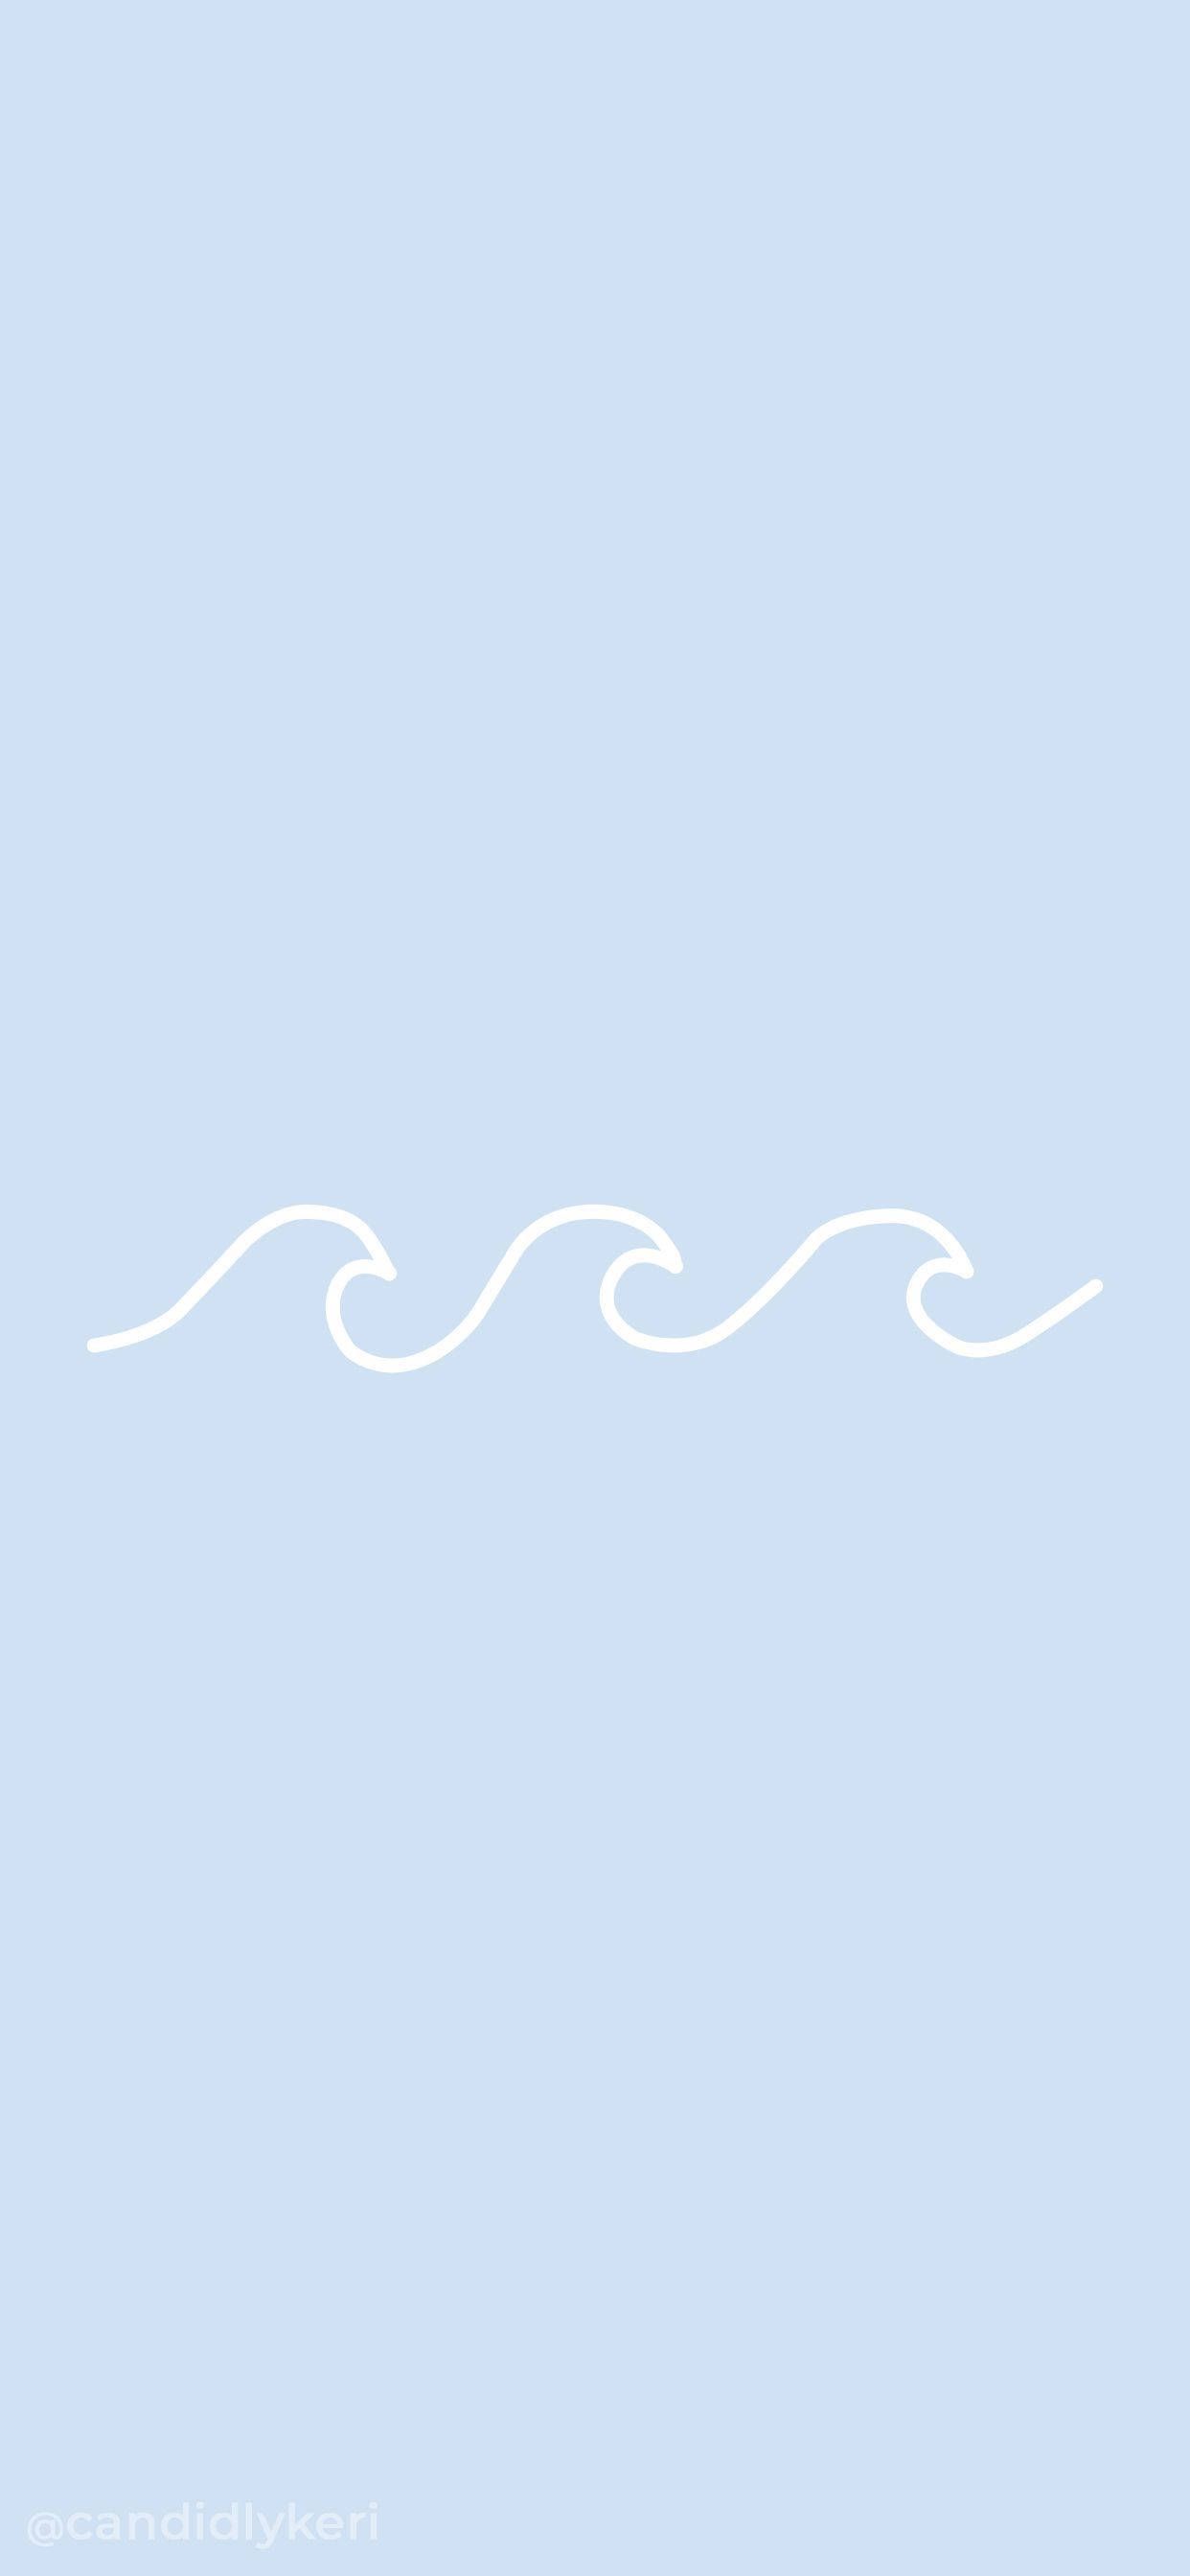 A white wave on top of blue background - Pastel minimalist